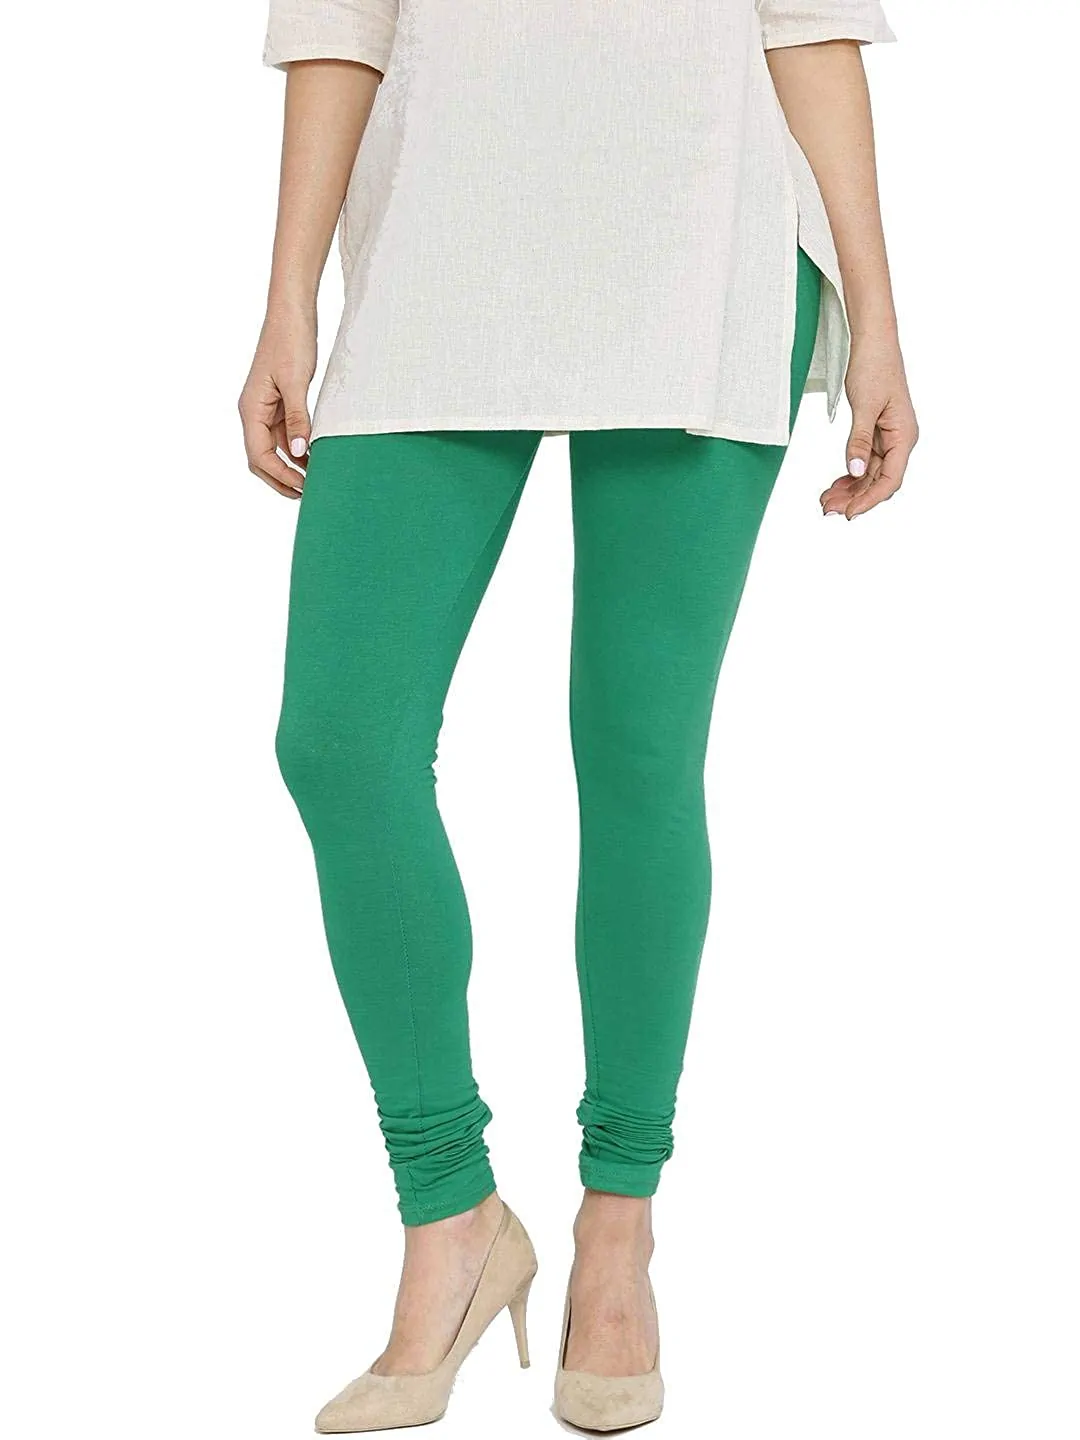 Mid Waist Ladies Neon Green Cotton Lycra Legging, Casual Wear, Skin Fit at  Rs 130 in New Delhi